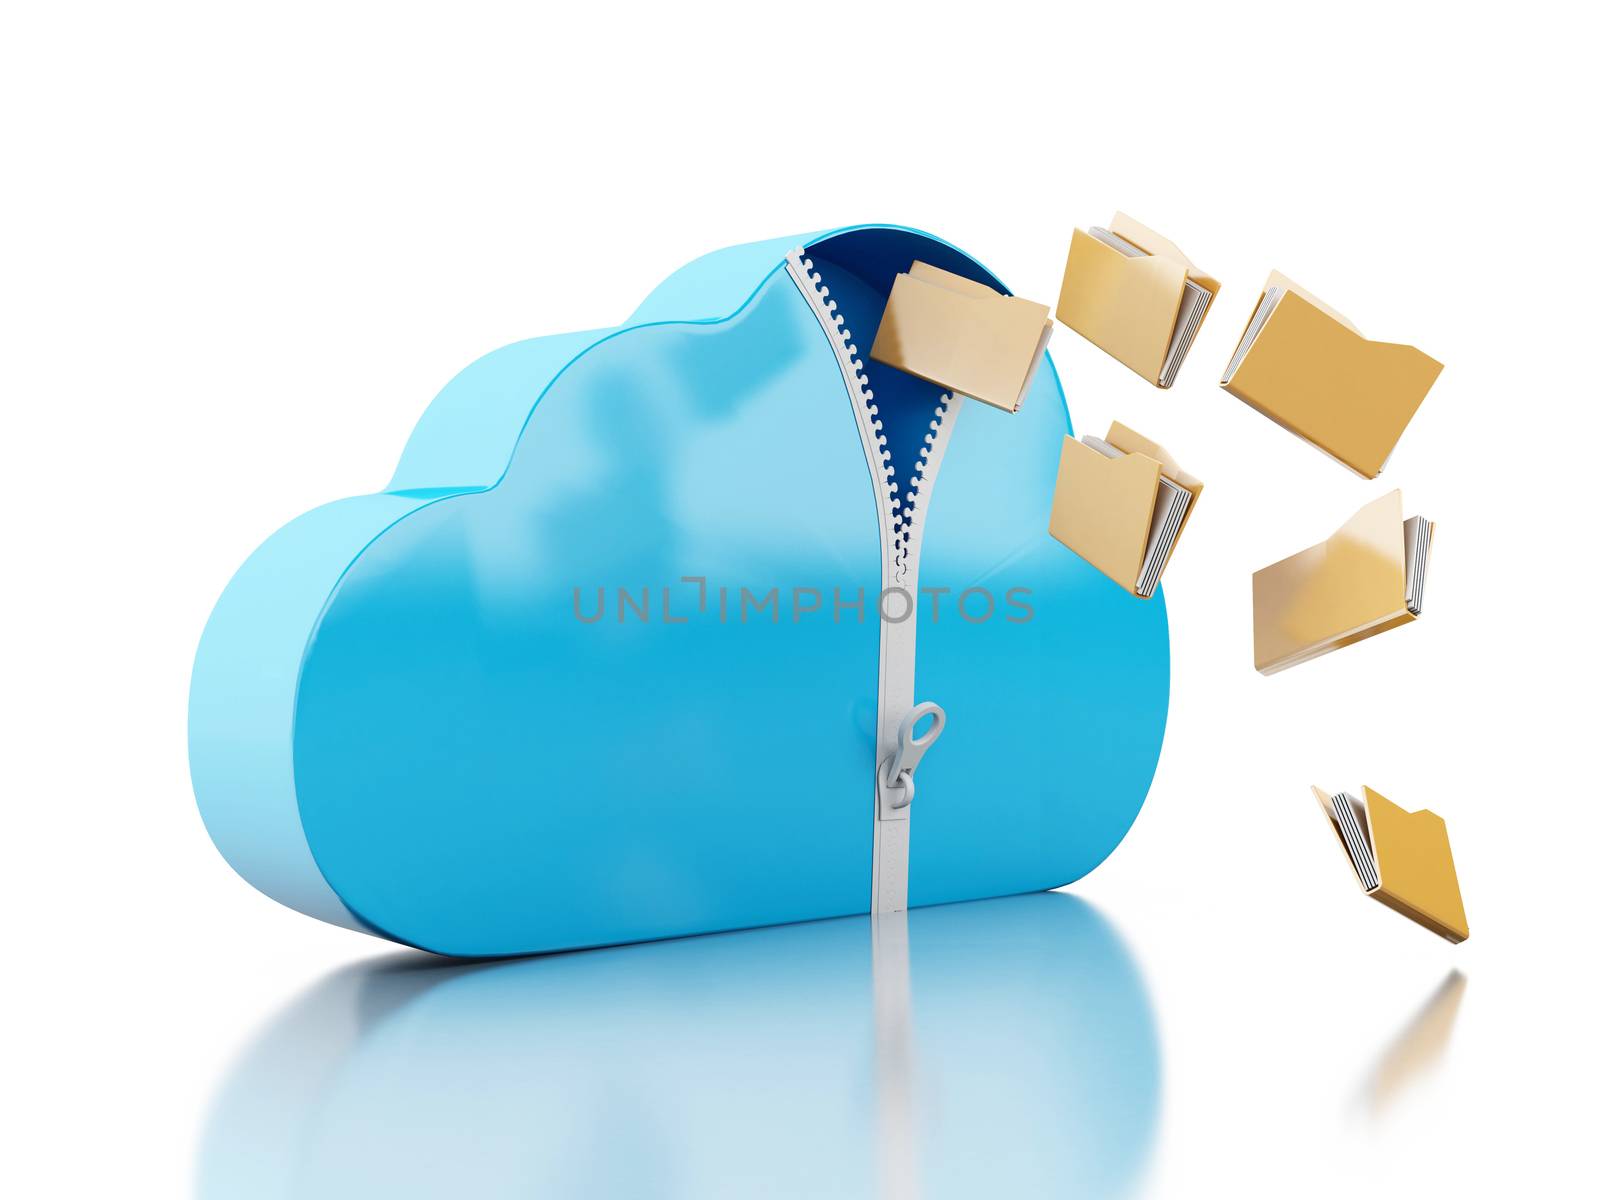 3d illustration. File storage in cloud. Cloud storage concept. Isolated white background.